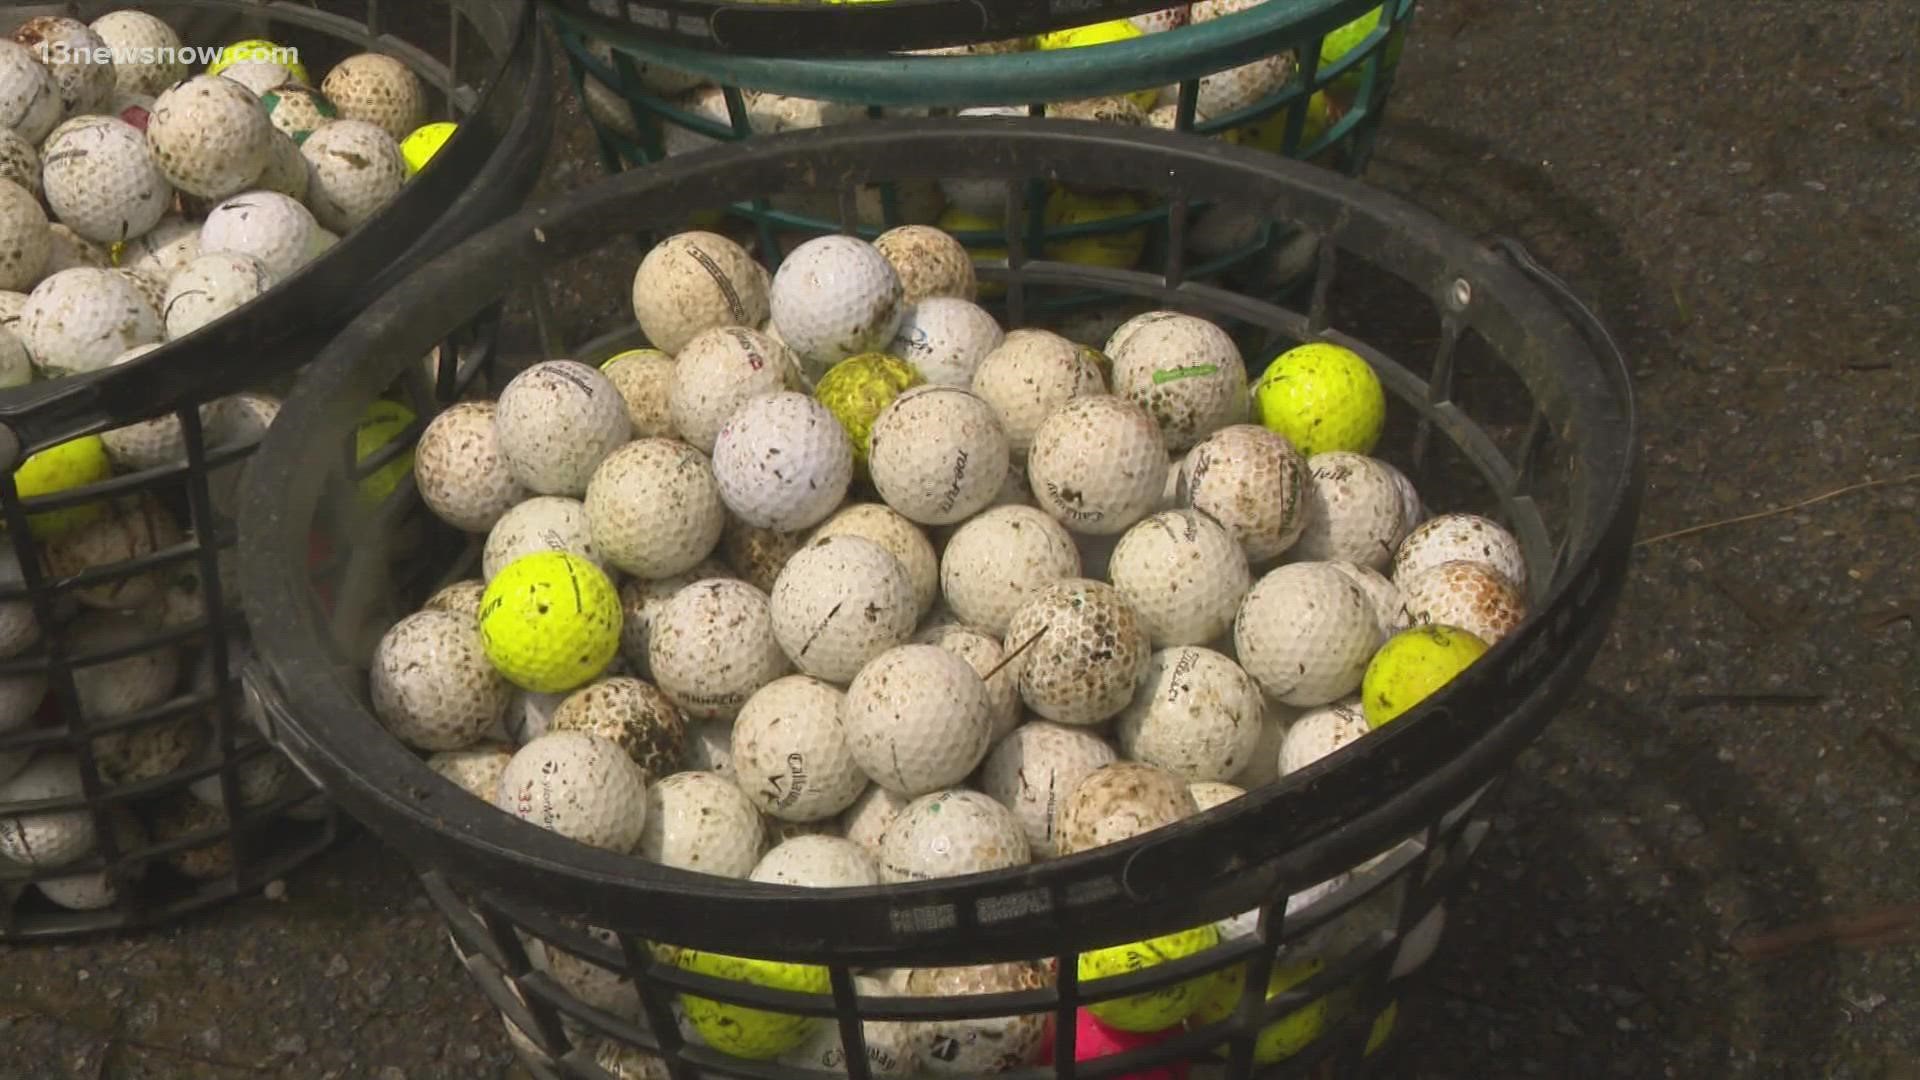 Diving for golf balls in ponds and putting them up for resale at "Your Golf Ball Shop."